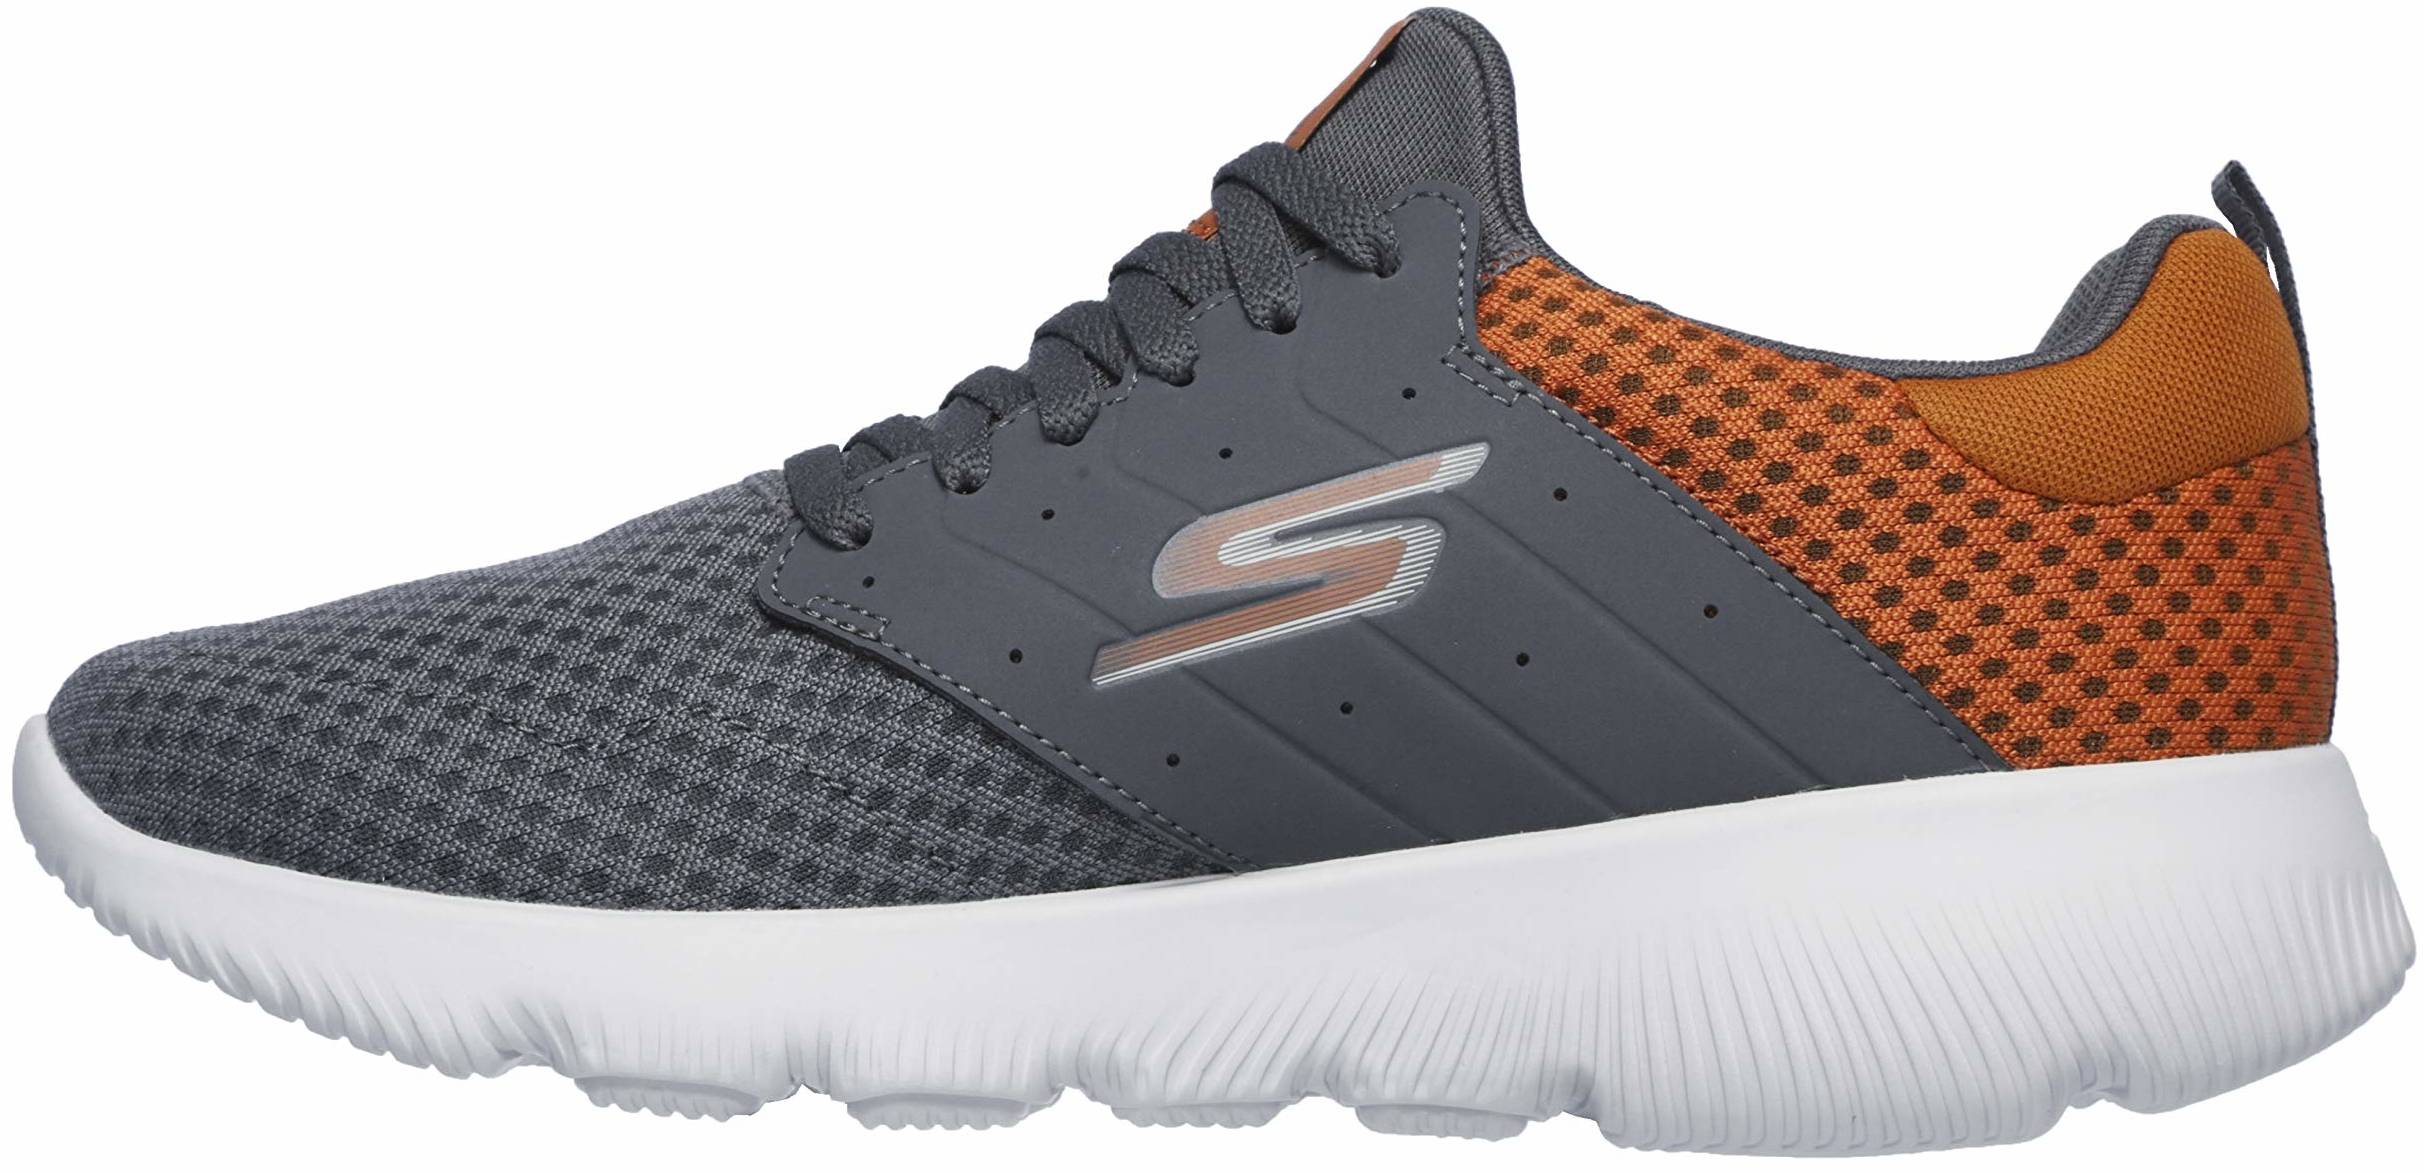 Save 57% on Skechers Running Shoes (57 